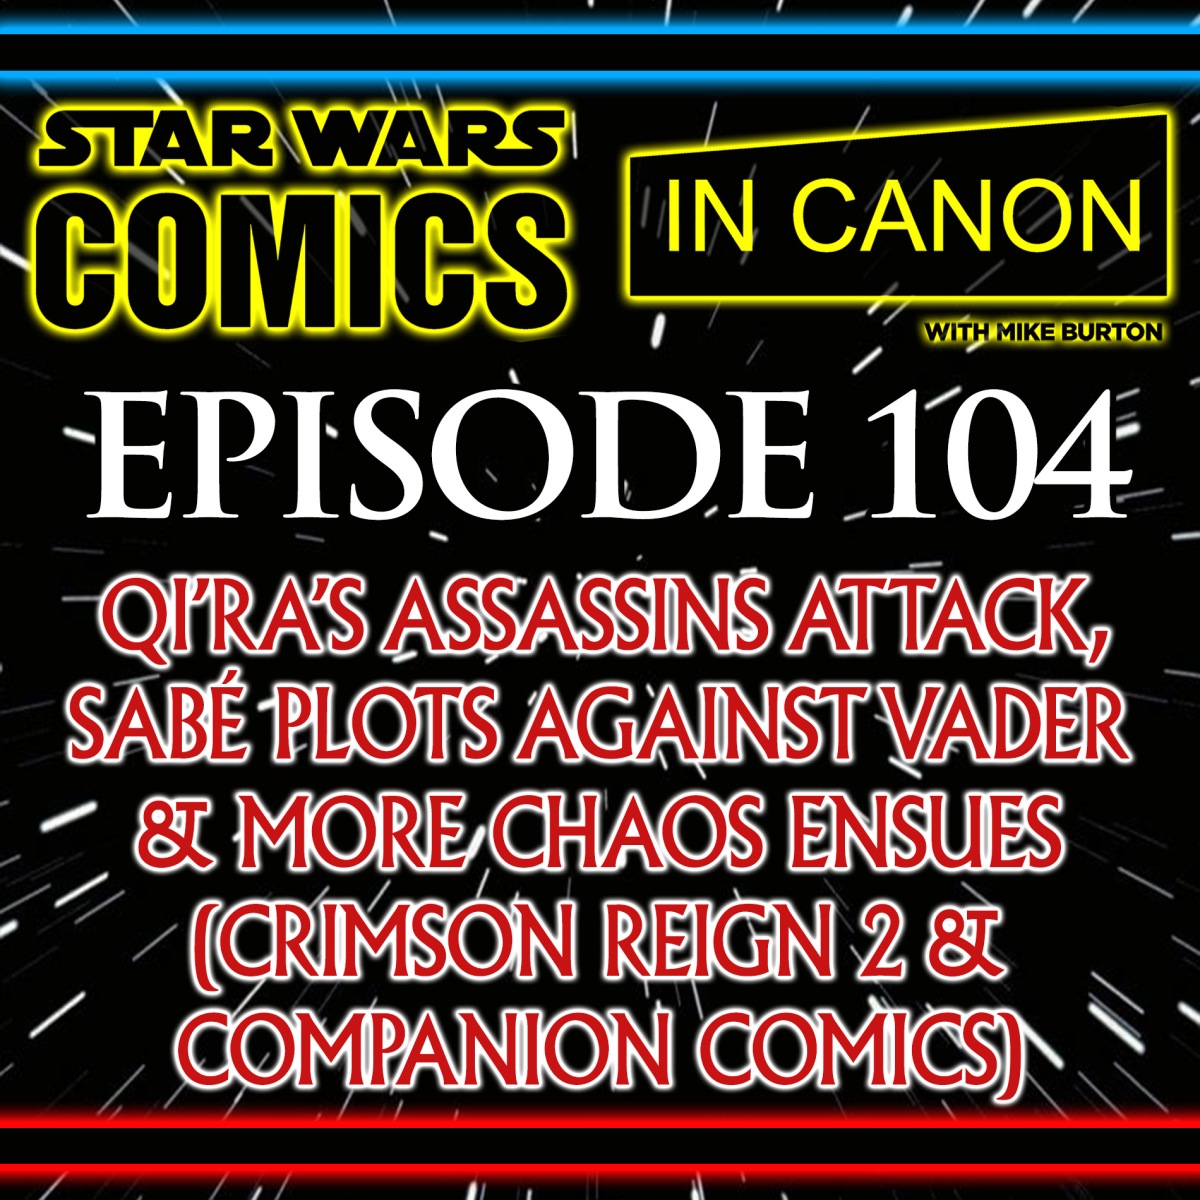 Star Wars: Comics In Canon – Crimson Reign 2: Qi’ra’s Assassins Attack, Sabé Plots Against Vader & More Chaos Ensues – (CR2, DV20, Bounty Hunters 20, Doctor Aphra 18 & SW21) – Ep 104